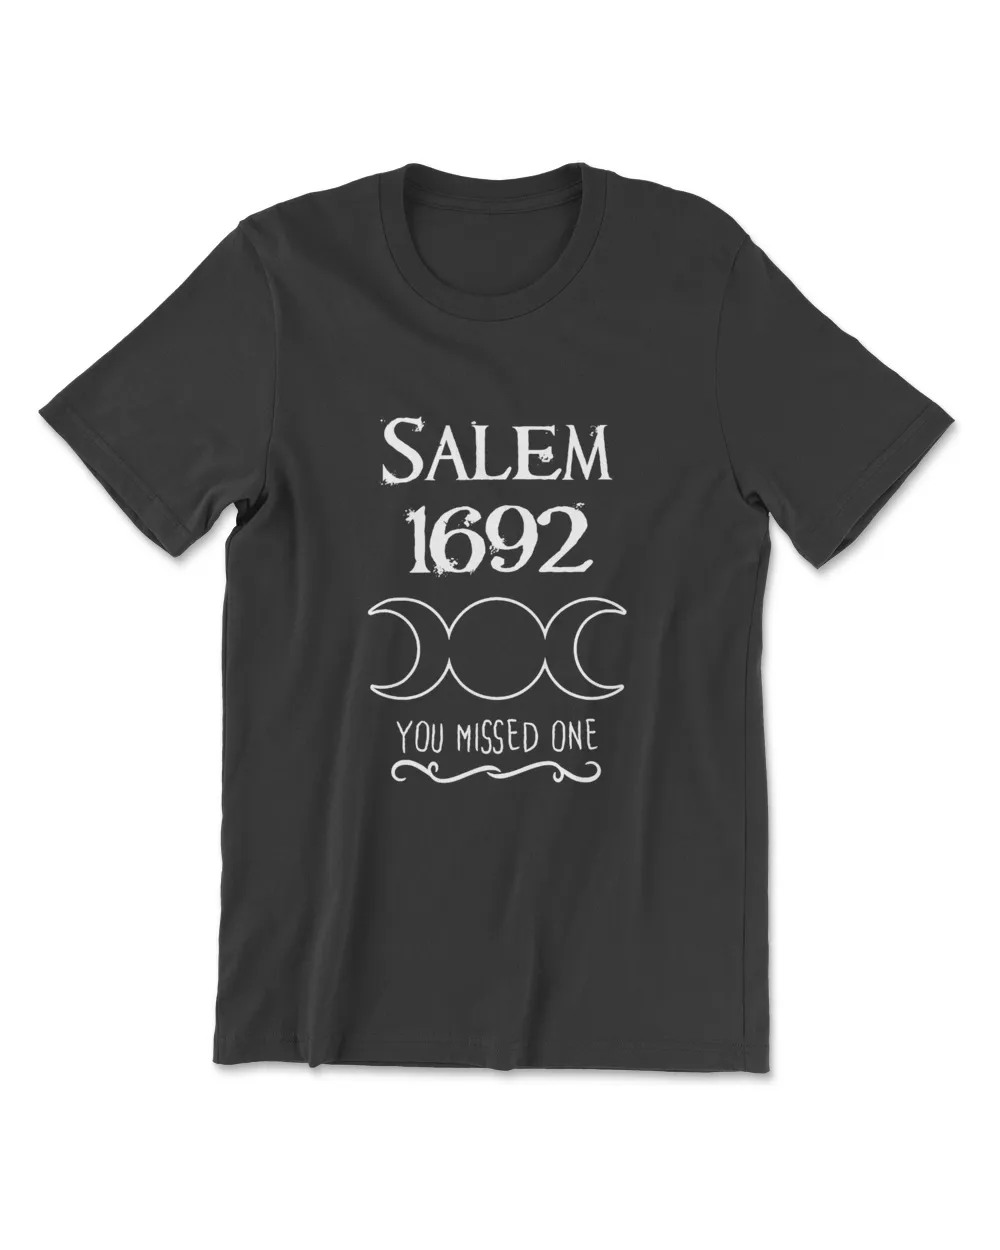 Salem Witch Trials 1692 You Missed One Funny Gift For Witchs T-Shirt